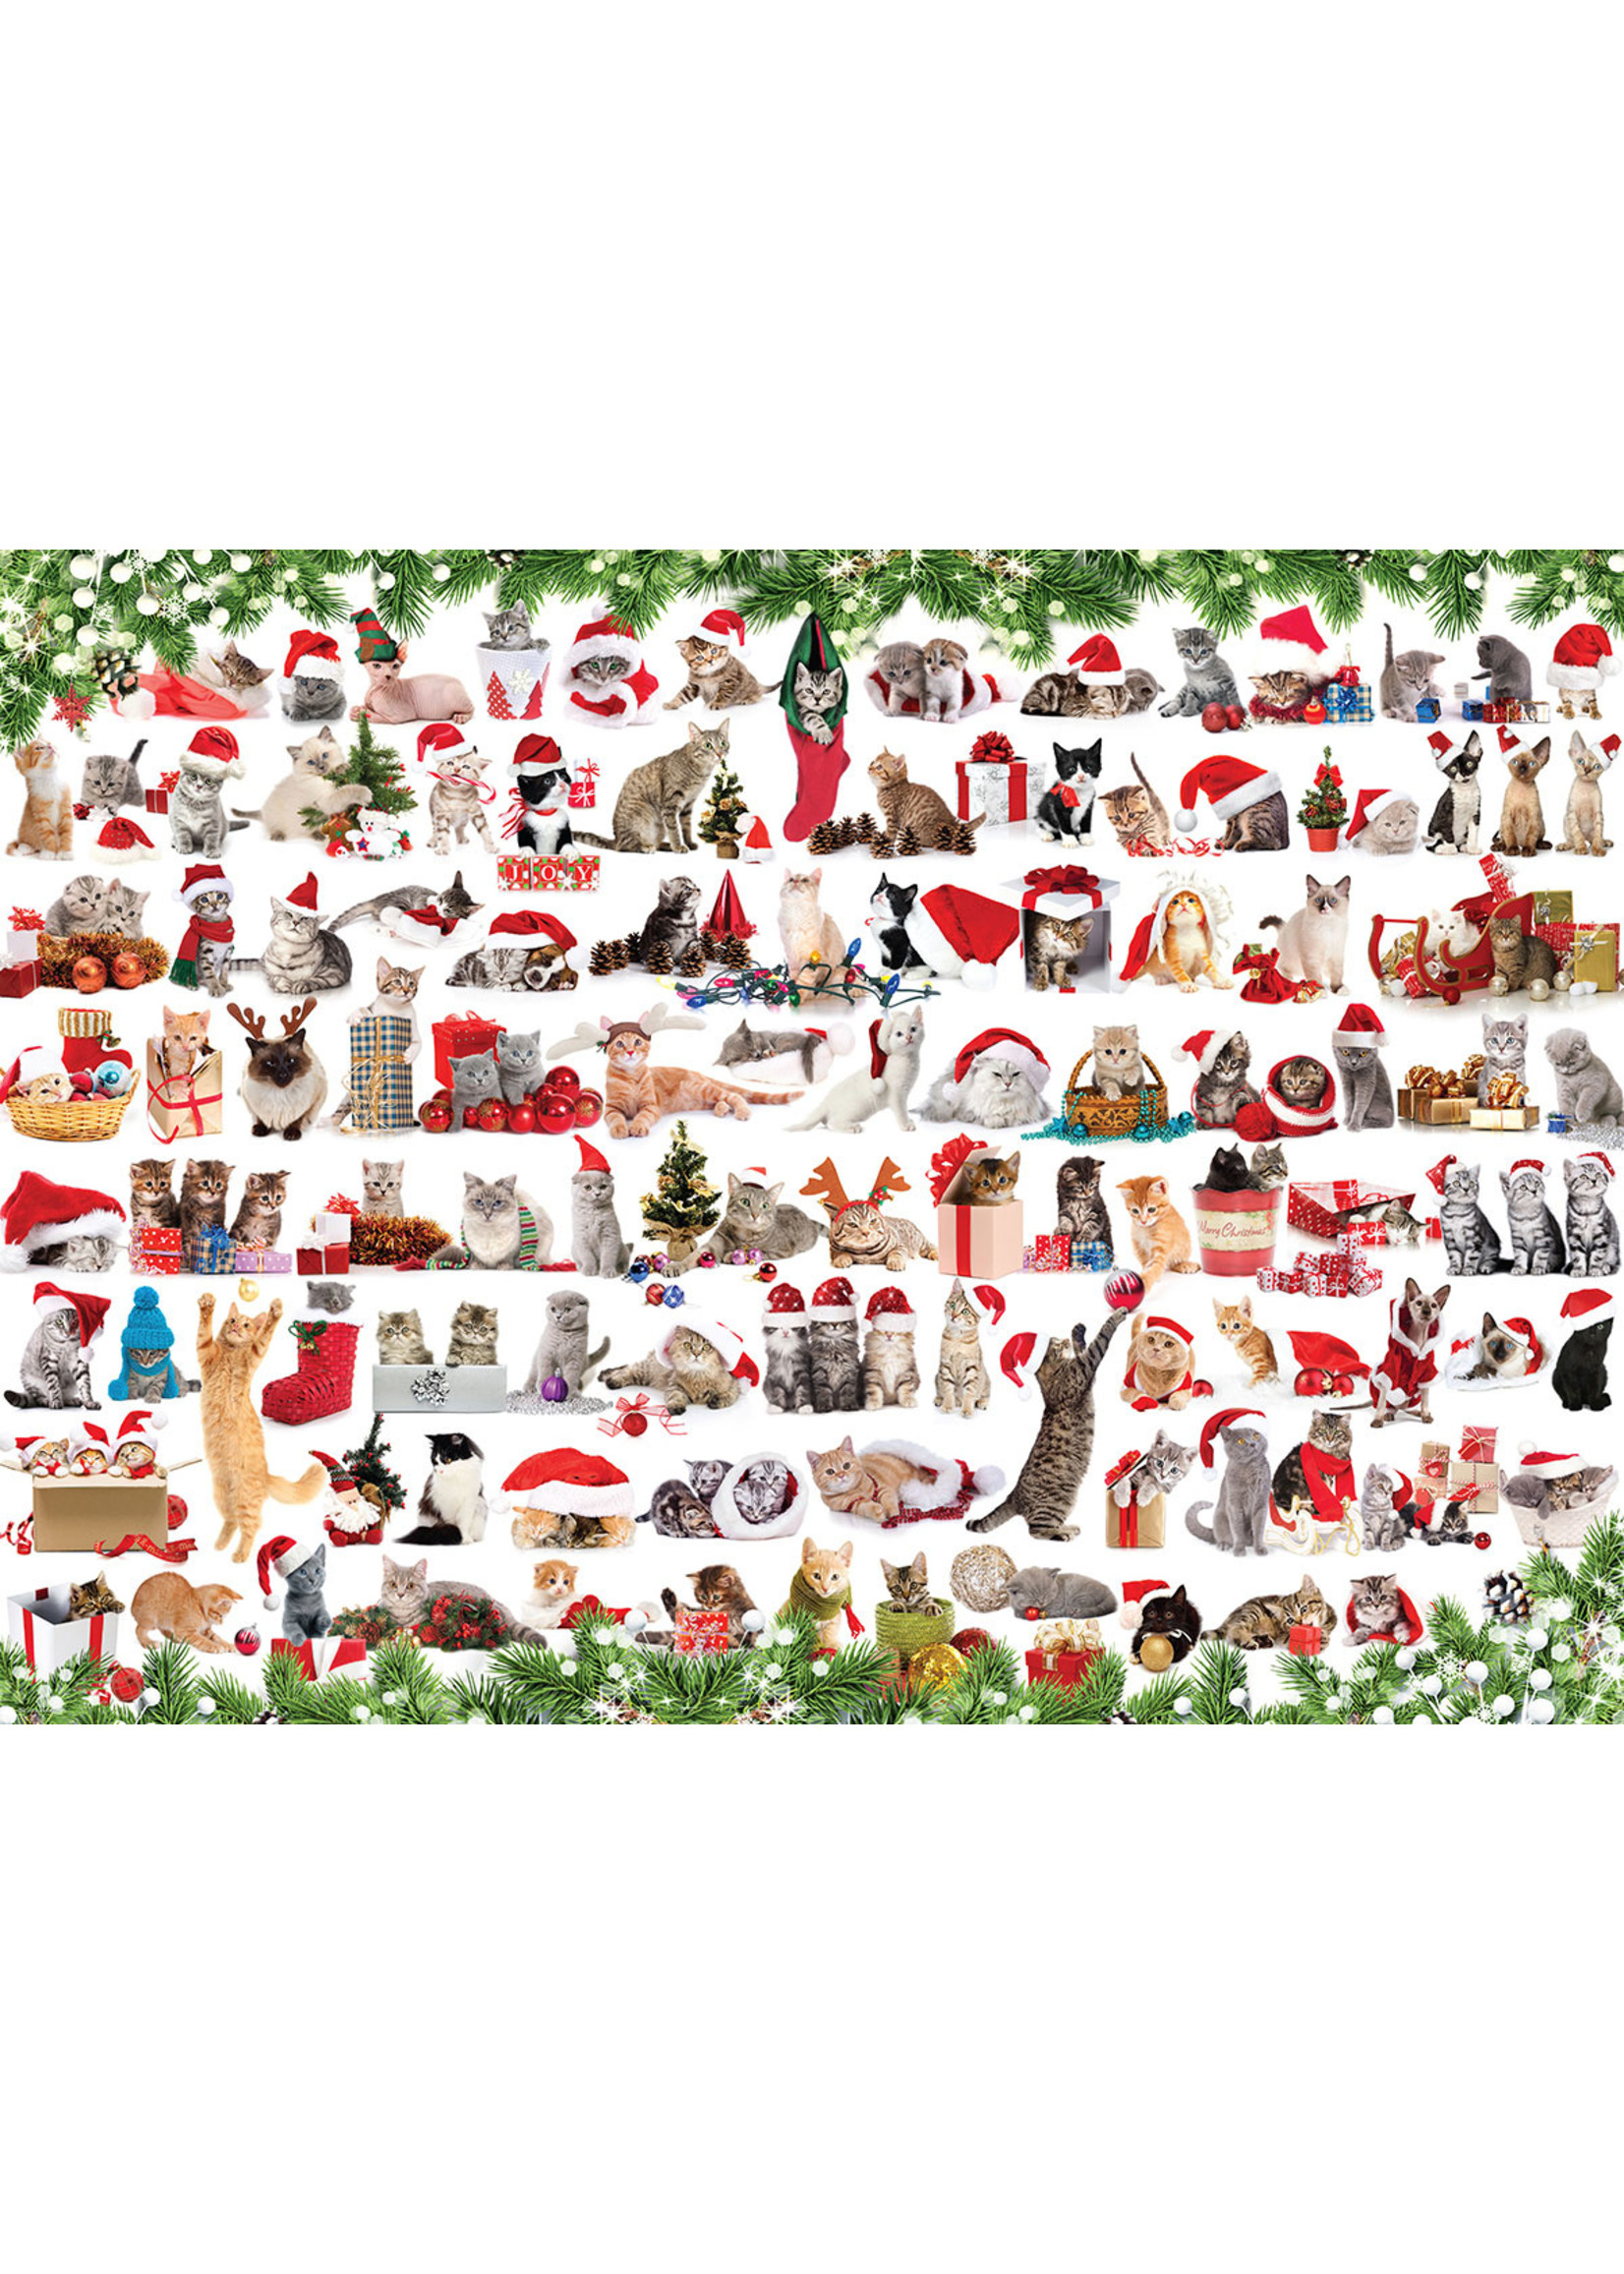 Eurographics Holiday Cats - 1000 Piece Puzzle